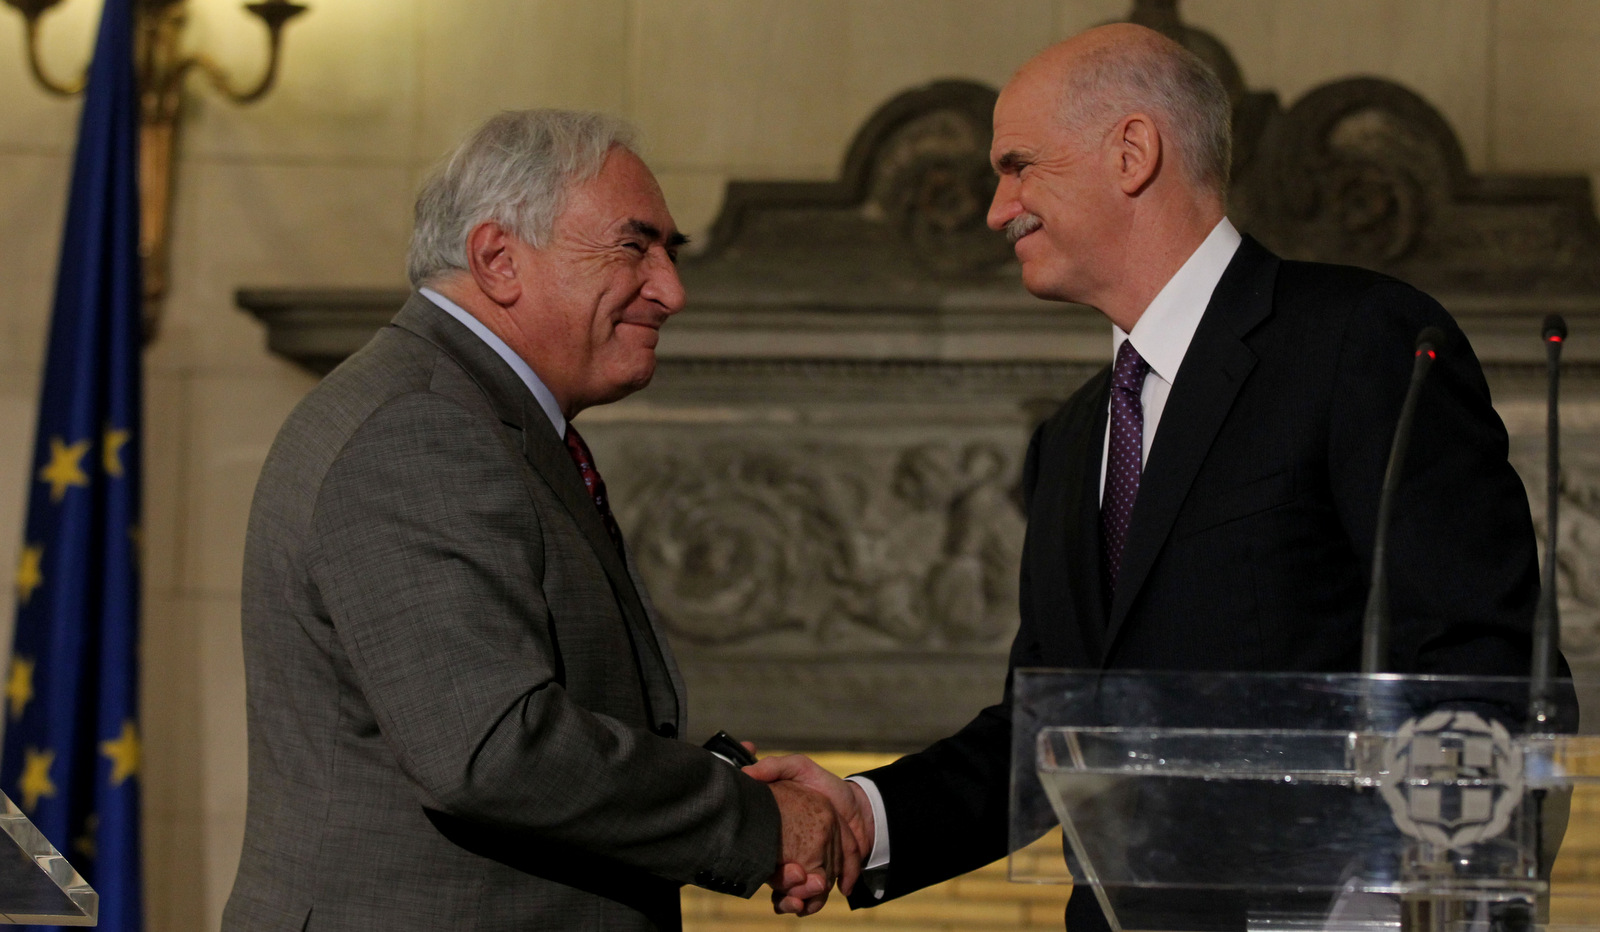 Greek Prime Minister George Papandreou, right, shakes hand with the head of the International Monetary Fund, Dominique Strauss-Kahn, during a joint news conference in Athens, Dec. 7, 2010. (AP/Thanassis Stavrakis)